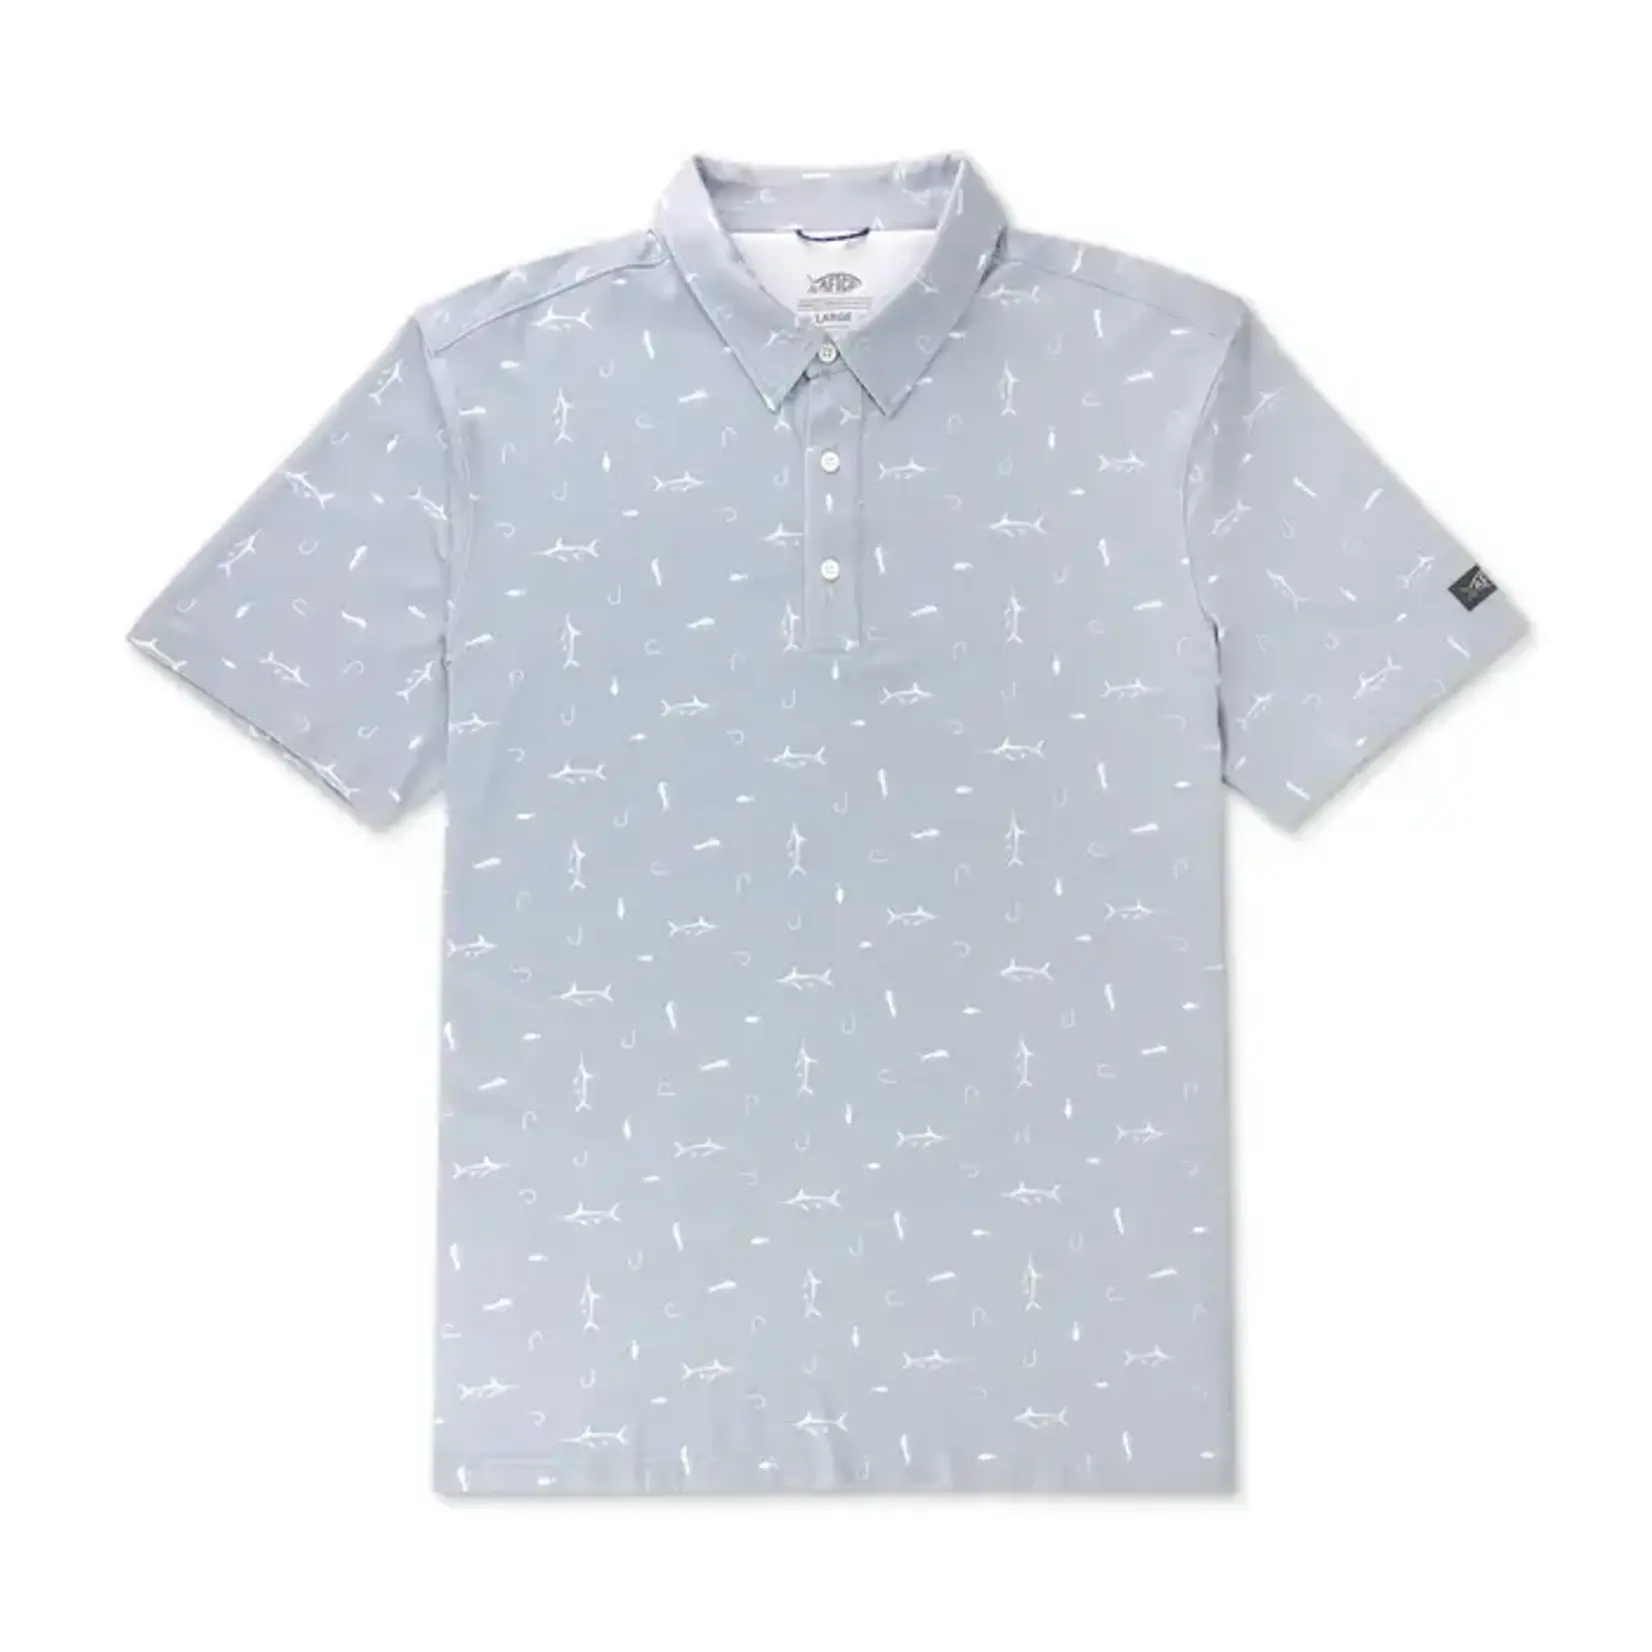 Aftco Aftco Men's Cypress  Printed Polo Shirt